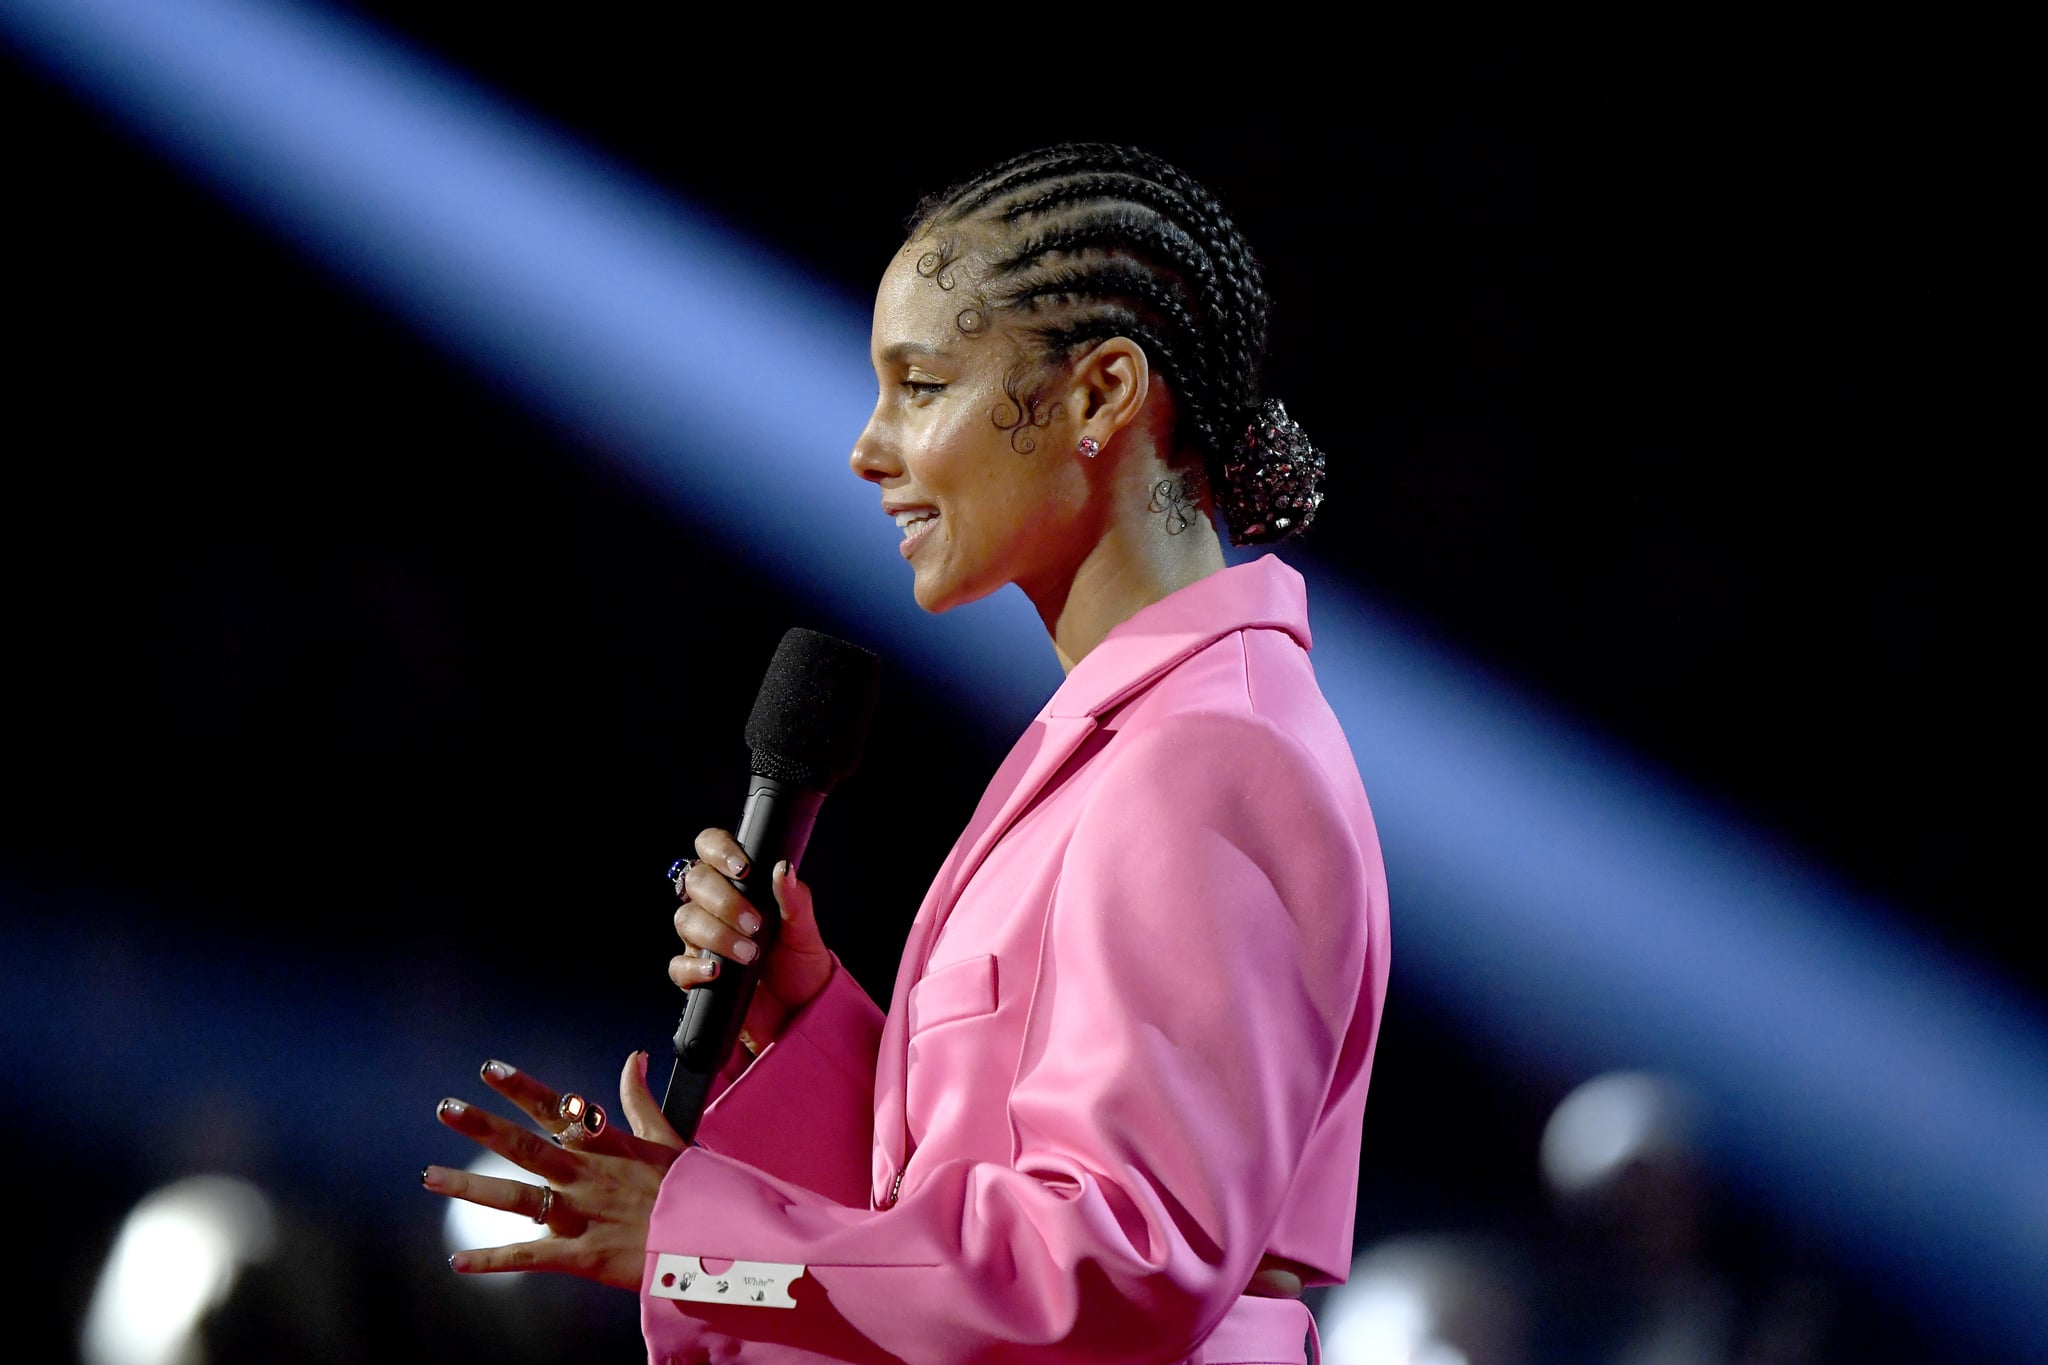 LOS ANGELES, CALIFORNIA - JANUARY 26: Host Alicia Keys speaks onstage during the 62nd Annual GRAMMY Awards at Staples Center on January 26, 2020 in Los Angeles, California. (Photo by Kevork Djansezian/Getty Images)